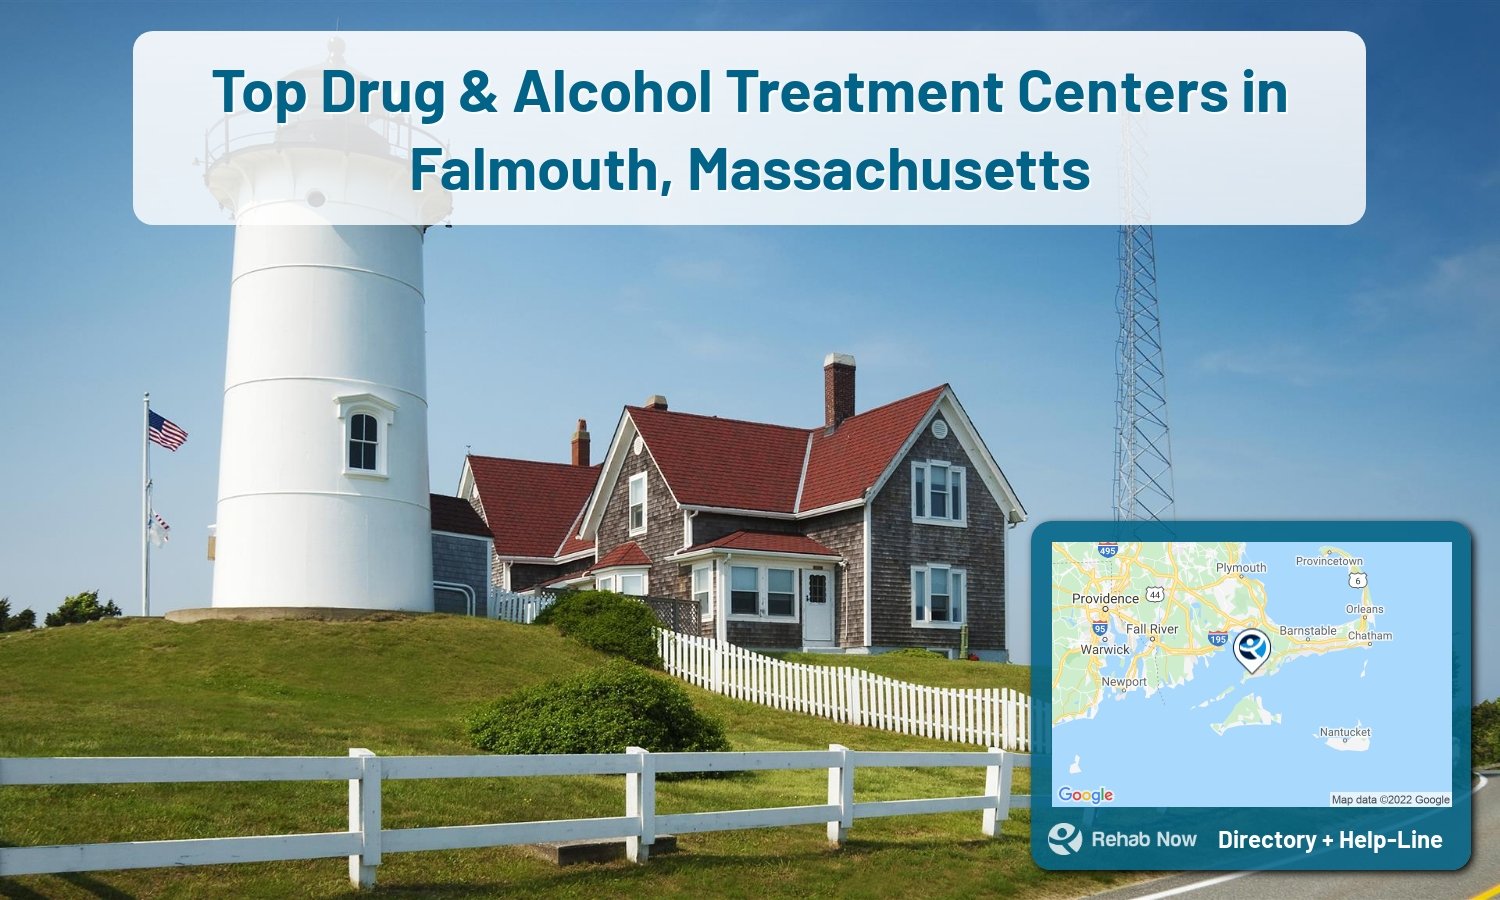 Ready to pick a rehab center in Falmouth? Get off alcohol, opiates, and other drugs, by selecting top drug rehab centers in Massachusetts